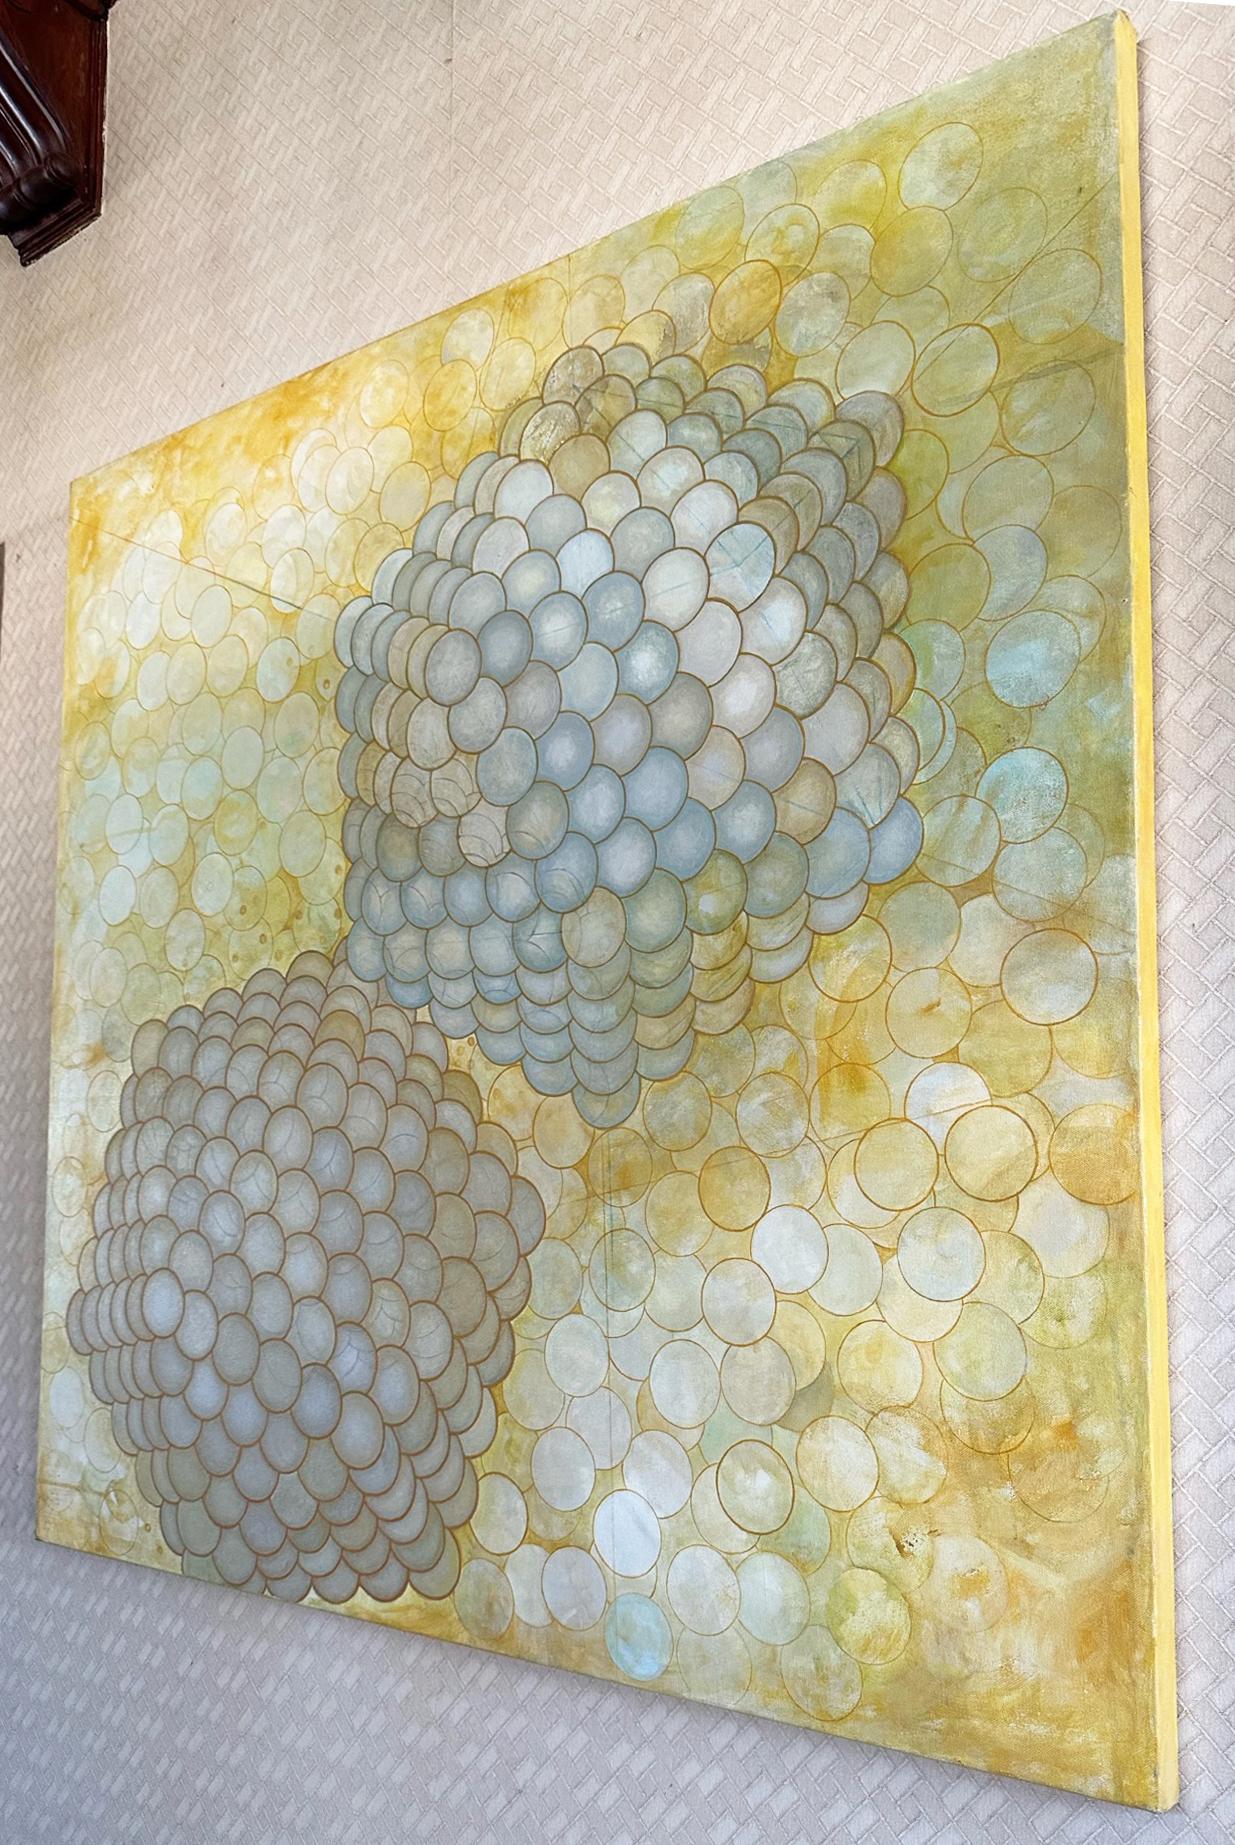 Sandra Cohen’s “I wanna luv ya” is a 48 x 48 x 1 inch abstract acrylic painting on canvas, in yellow, grey, and white. Two virus molecules gravitate towards each other through a dense magnified field, in hopes of reproducing (possibly with make-out